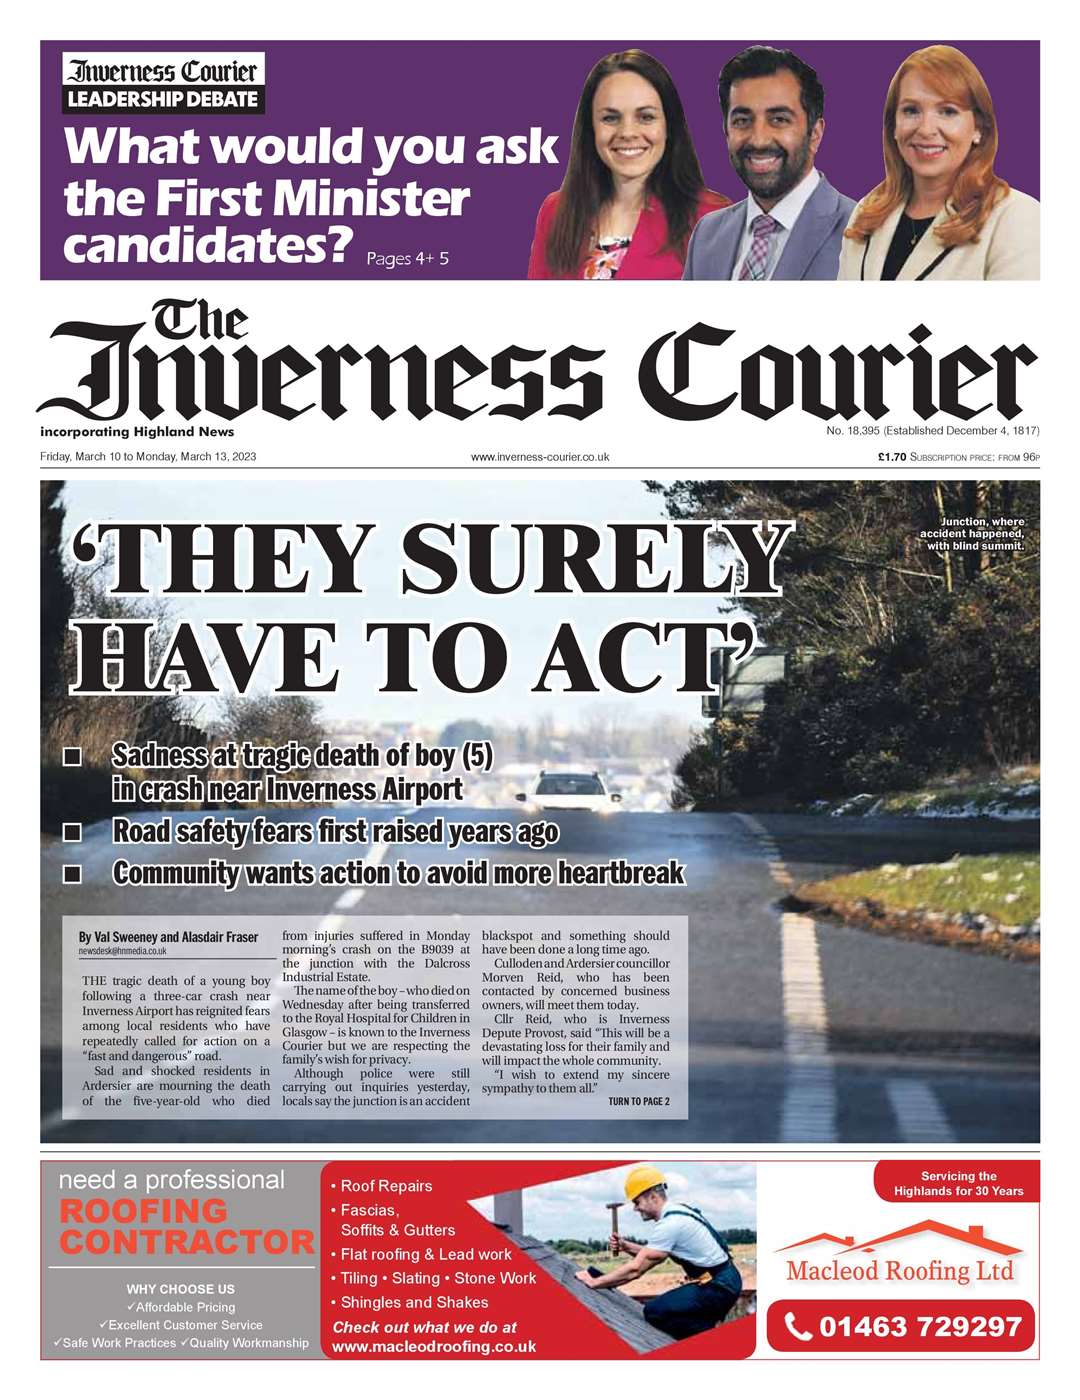 The Inverness Courier, March 10, front page.